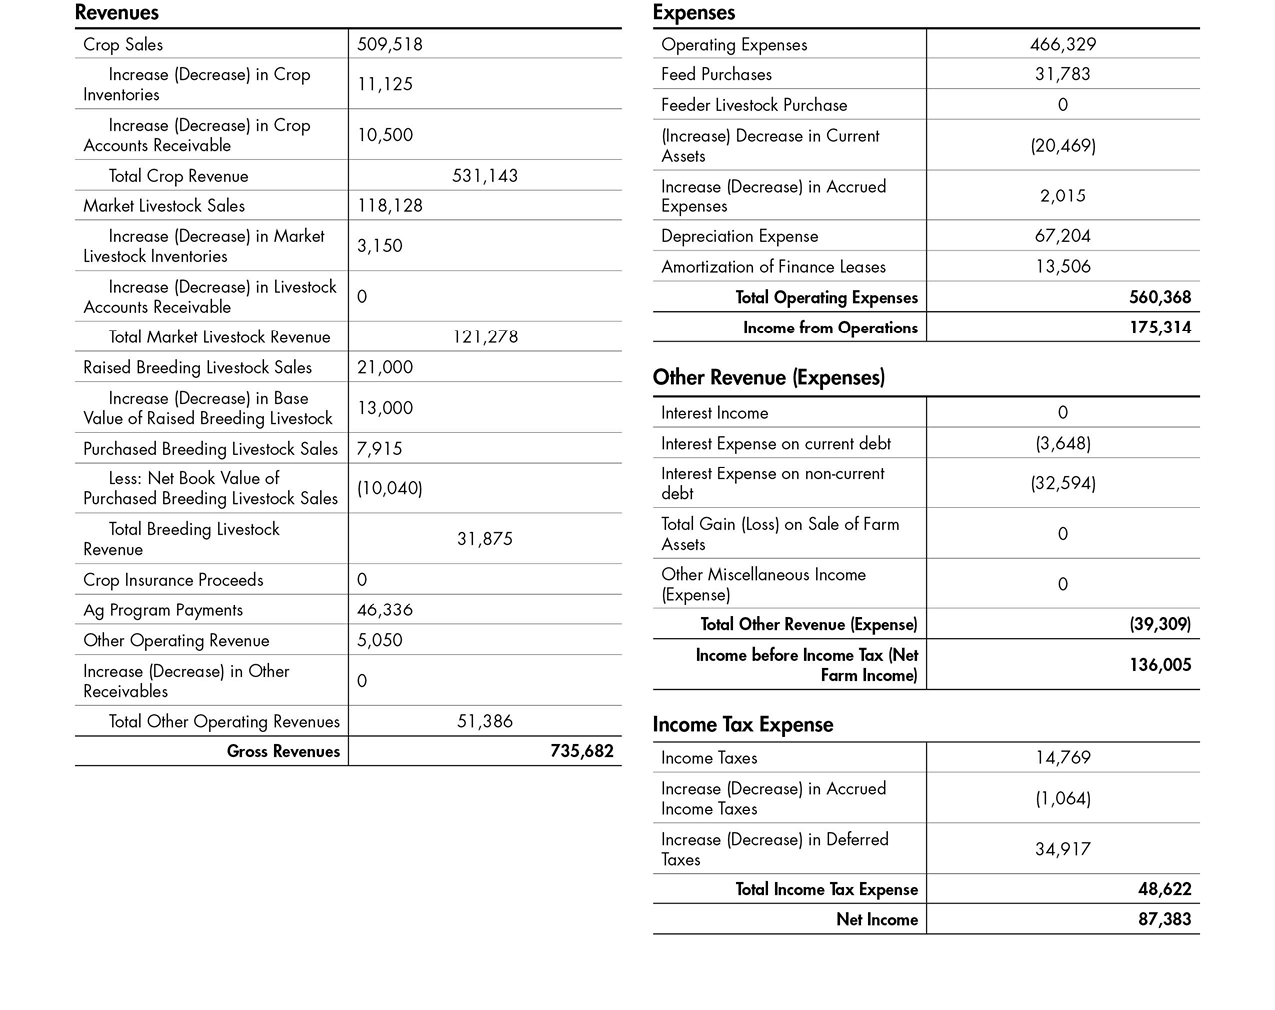 A sample income statement with figures and details for example revenue, expenses, and income tax expenses.